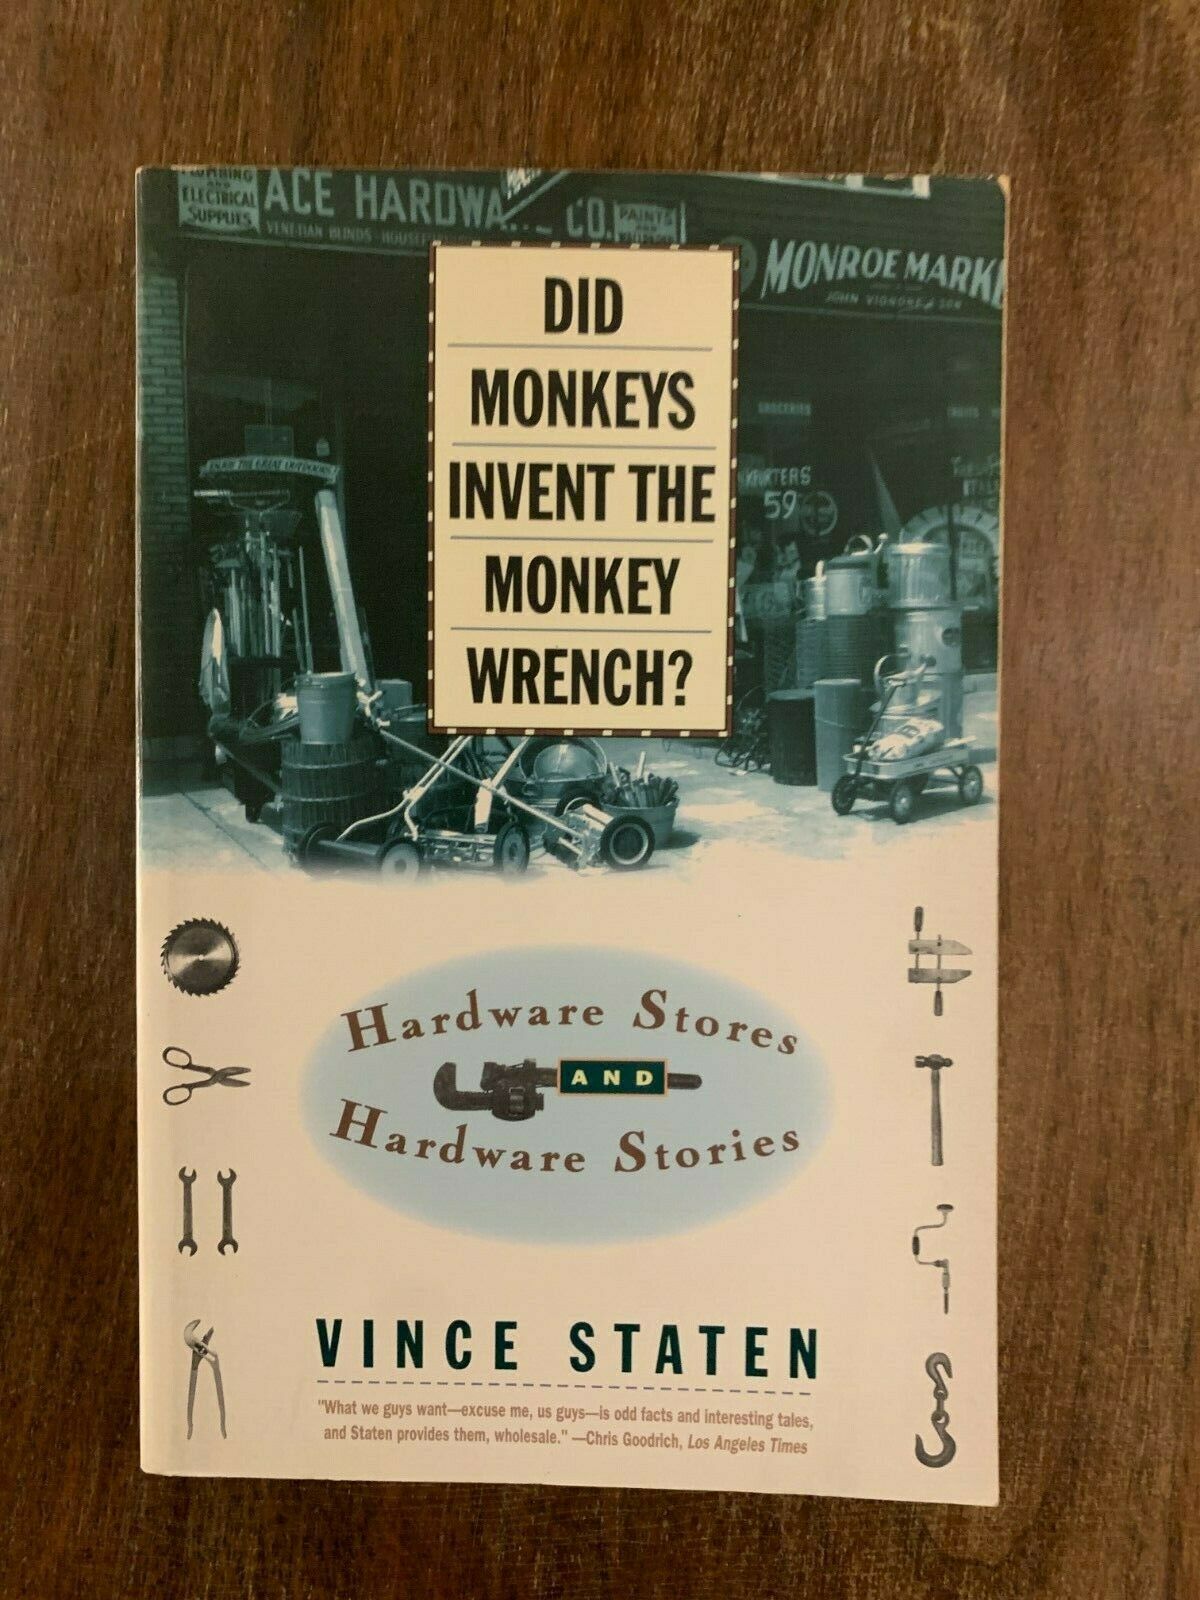 Did Monkeys Invent the Monkey Wrench? Hardware Stores, Stories, Vince Staten, Q3